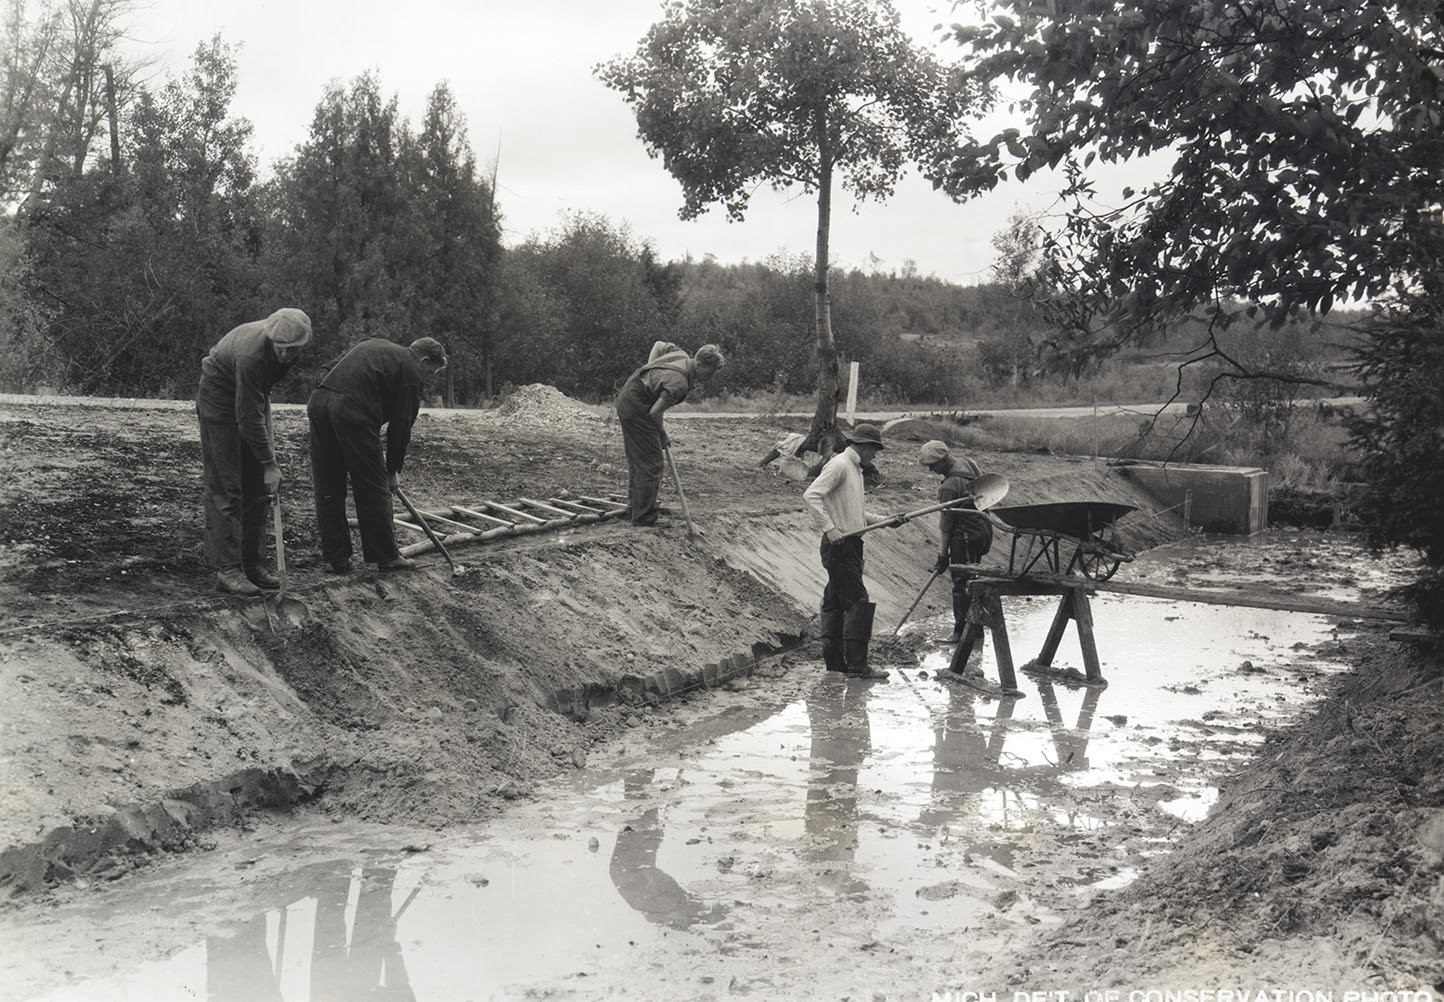 Civilian Conservation Corps crews worked on countless projects across Michigan and the nation during the 1930s.